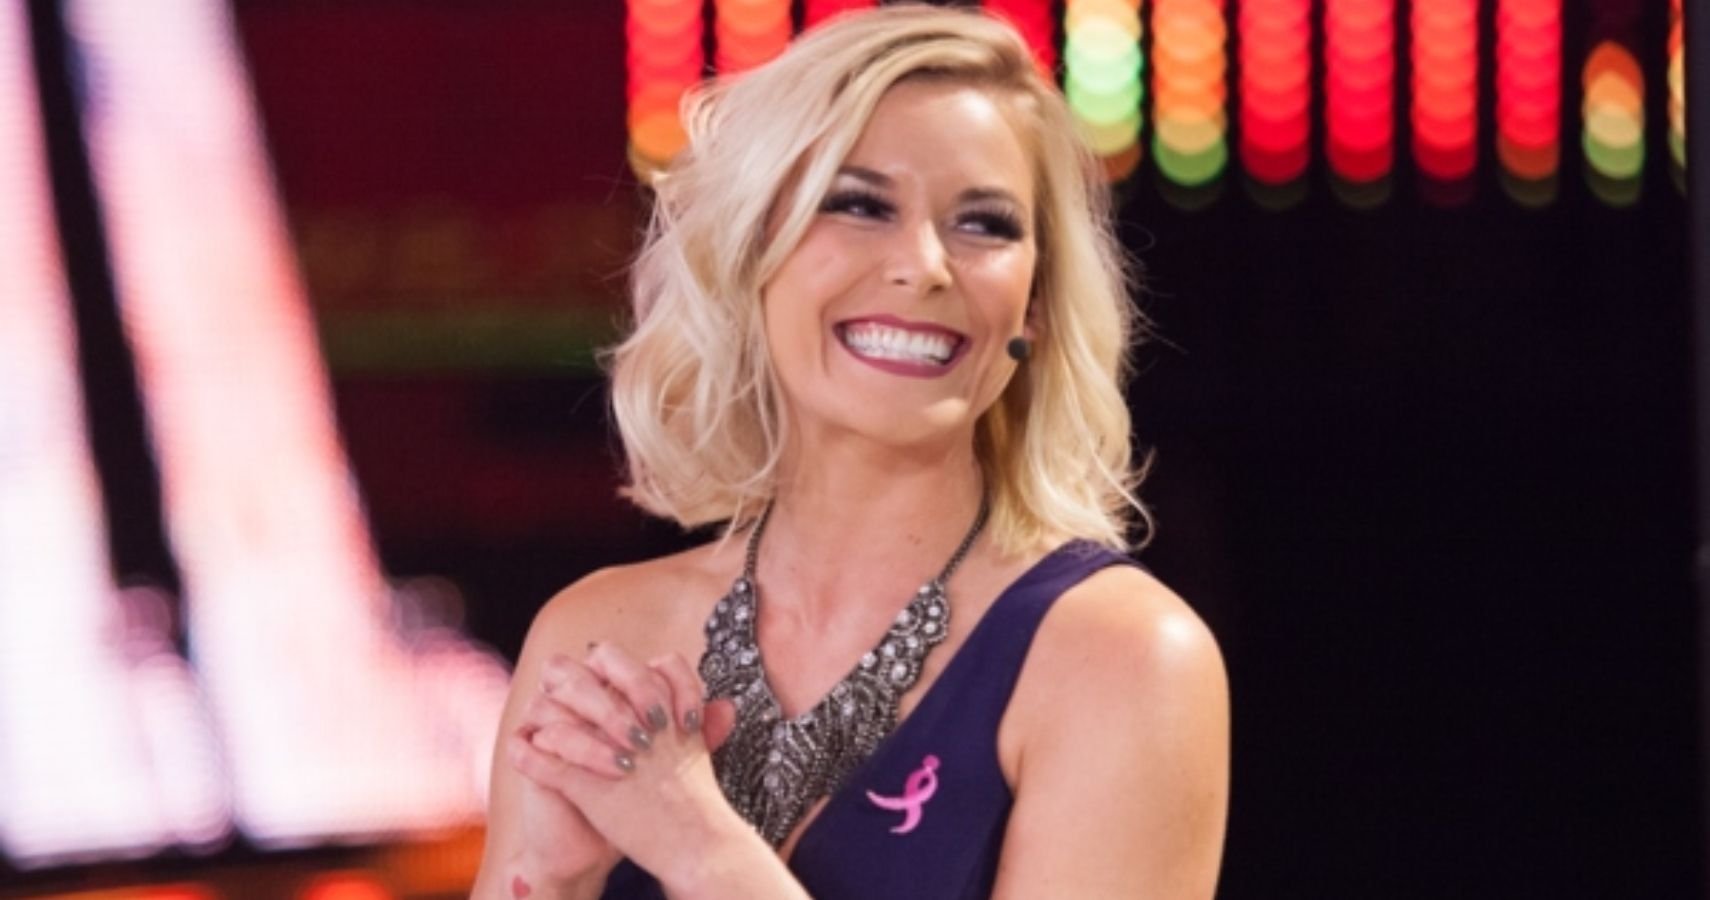 Renee Paquette Reveals What She Least Enjoyed About Working With WWE